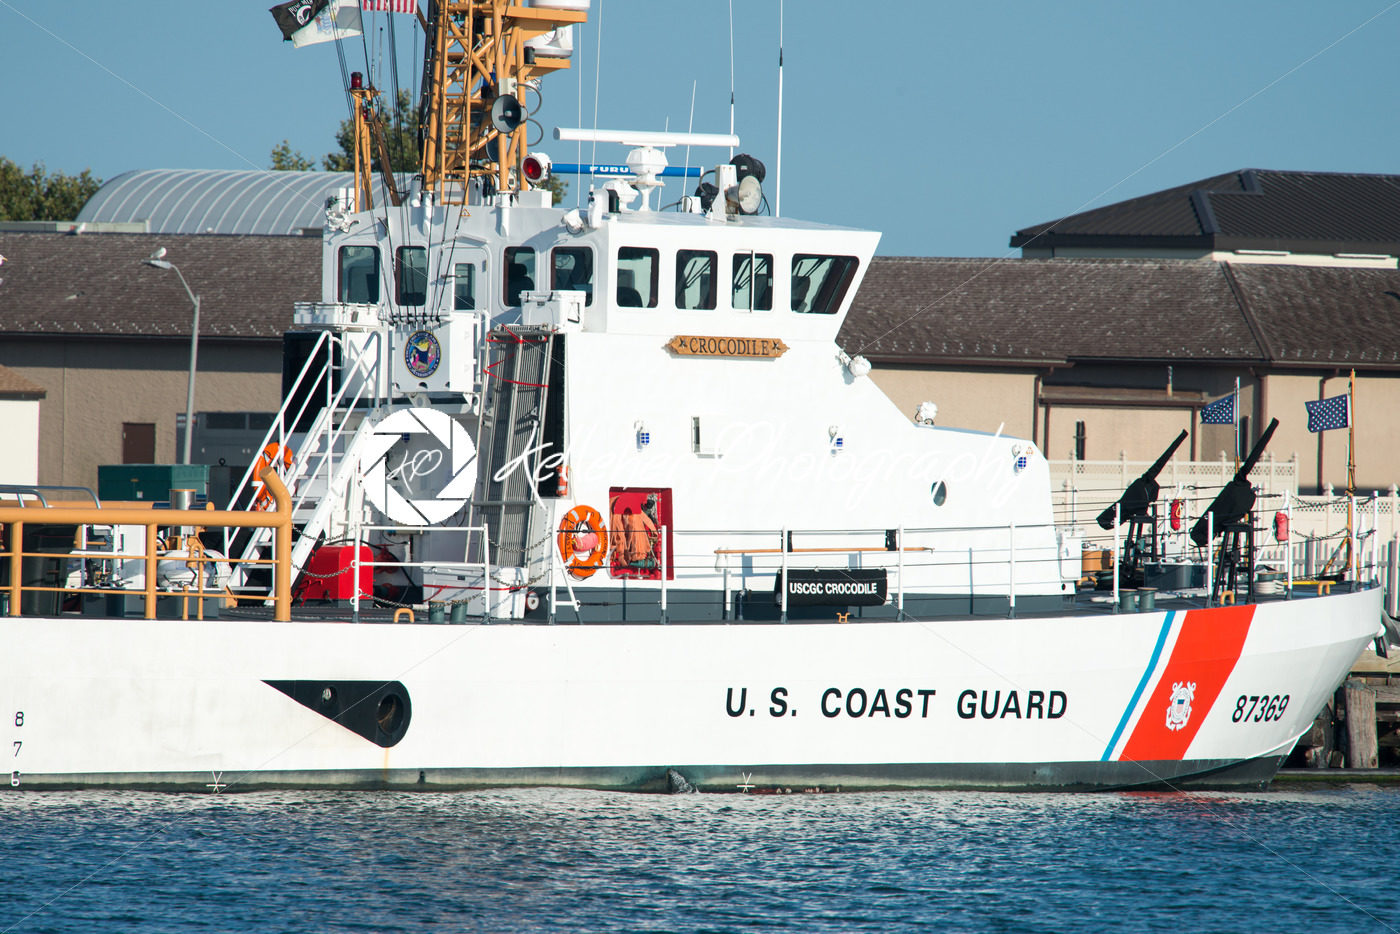 The U.S. Coast Guard Cutter Crocodile, located in Cape May Point, NJ - Kelleher Photography Store